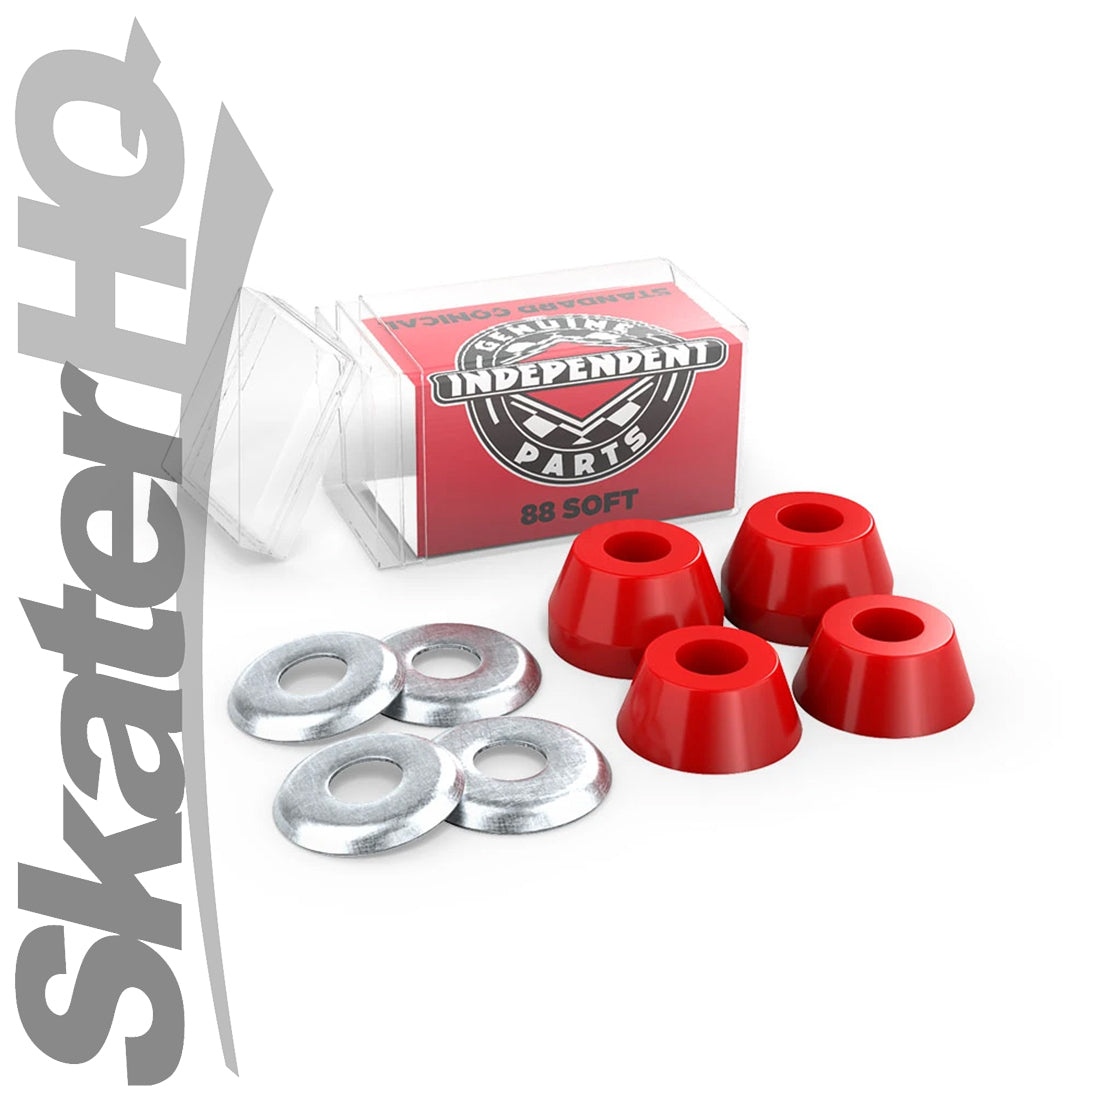 Independent STD/Conical 88a Soft Cushions - Red Skateboard Hardware and Parts